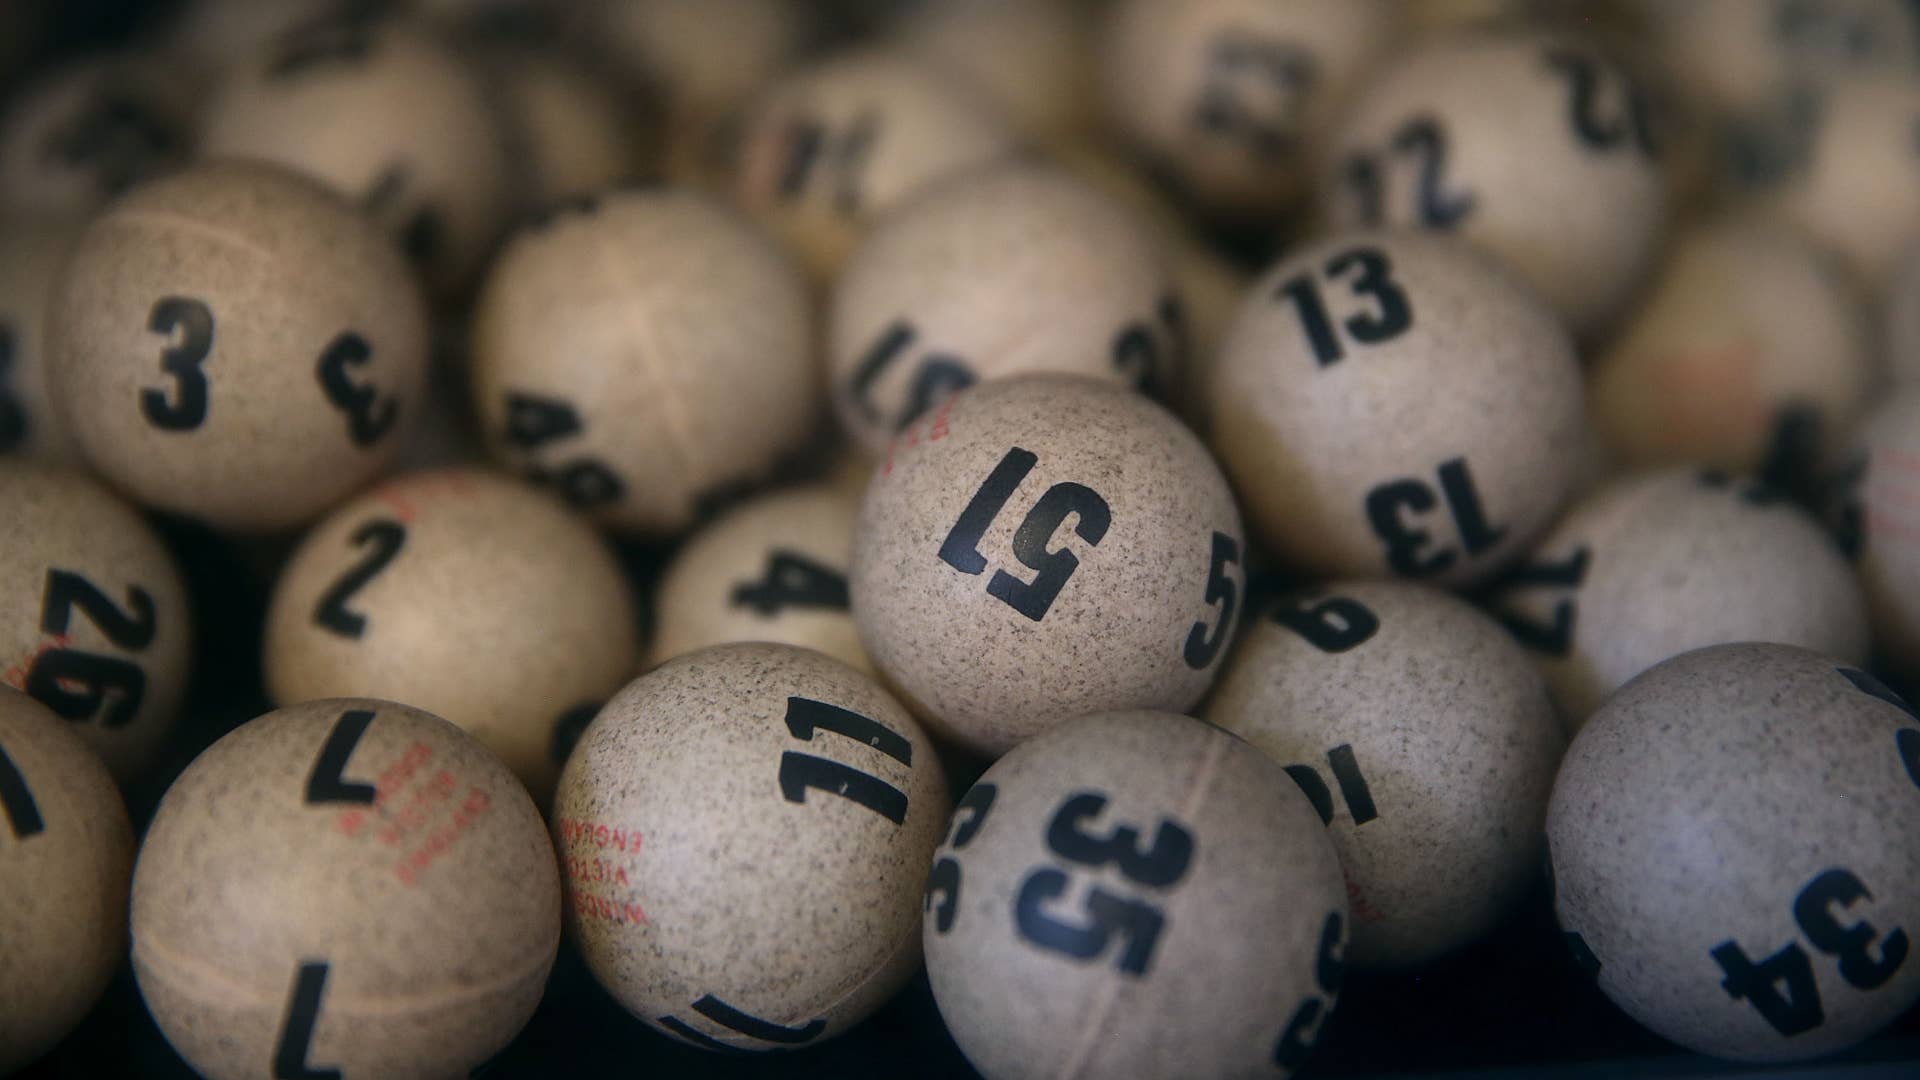 Lottery balls are seen in a box at Kavanagh Liquors on January 13, 2016.